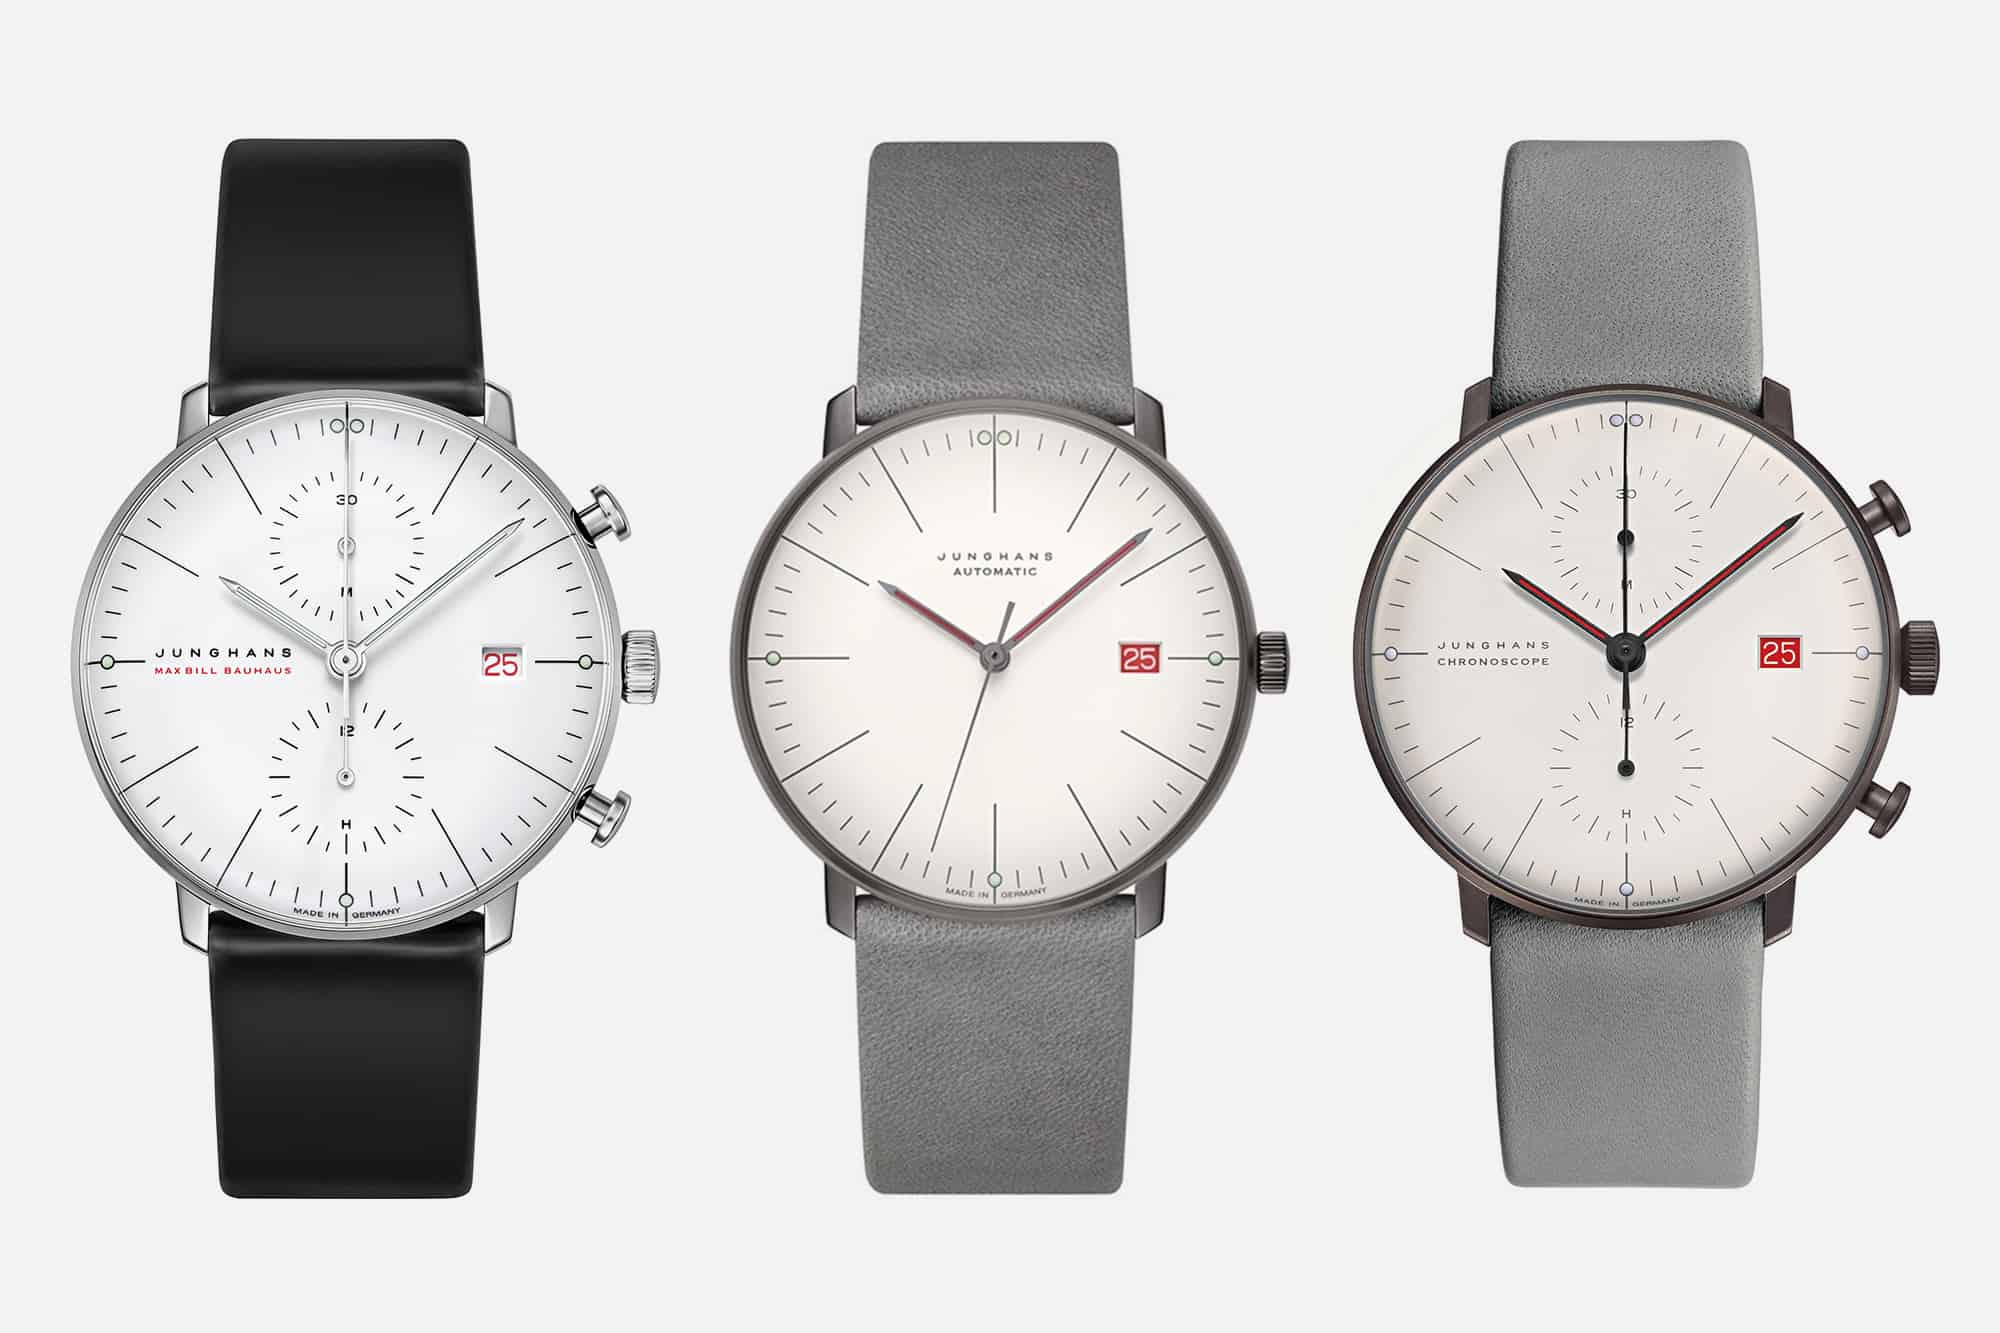 Bauhaus Turns 100: A Guide to the Special Edition Watches Celebrating the Movement’s 100th Anniversary